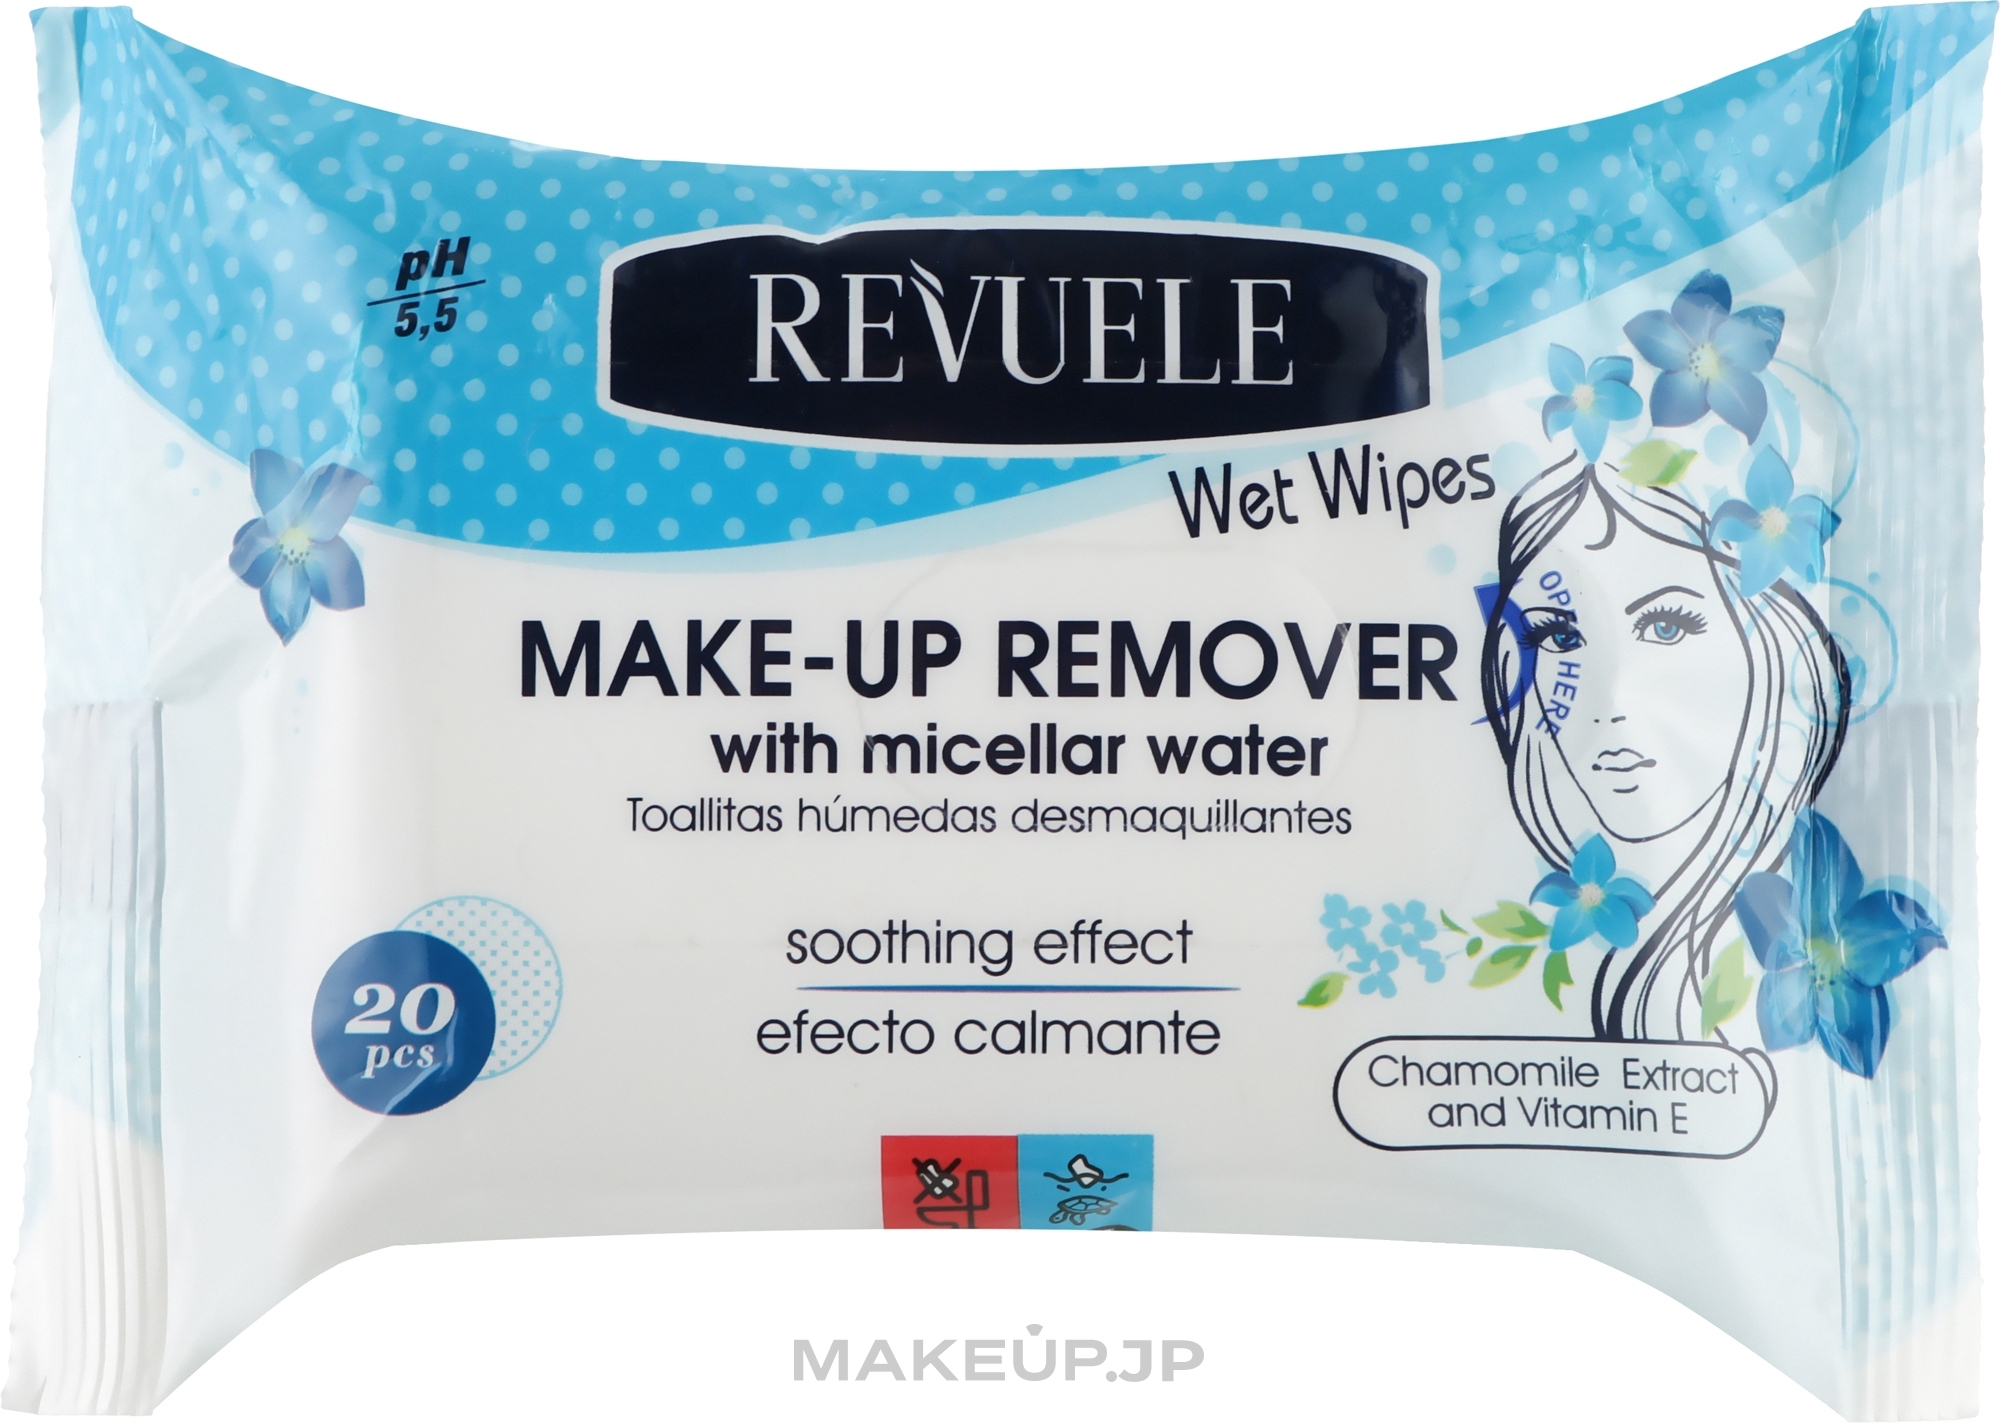 Makeup Removing Wet Wipes with Micellar Water - Revuele Wet Wipes Makeup Remove With Micellar Water — photo 20 szt.